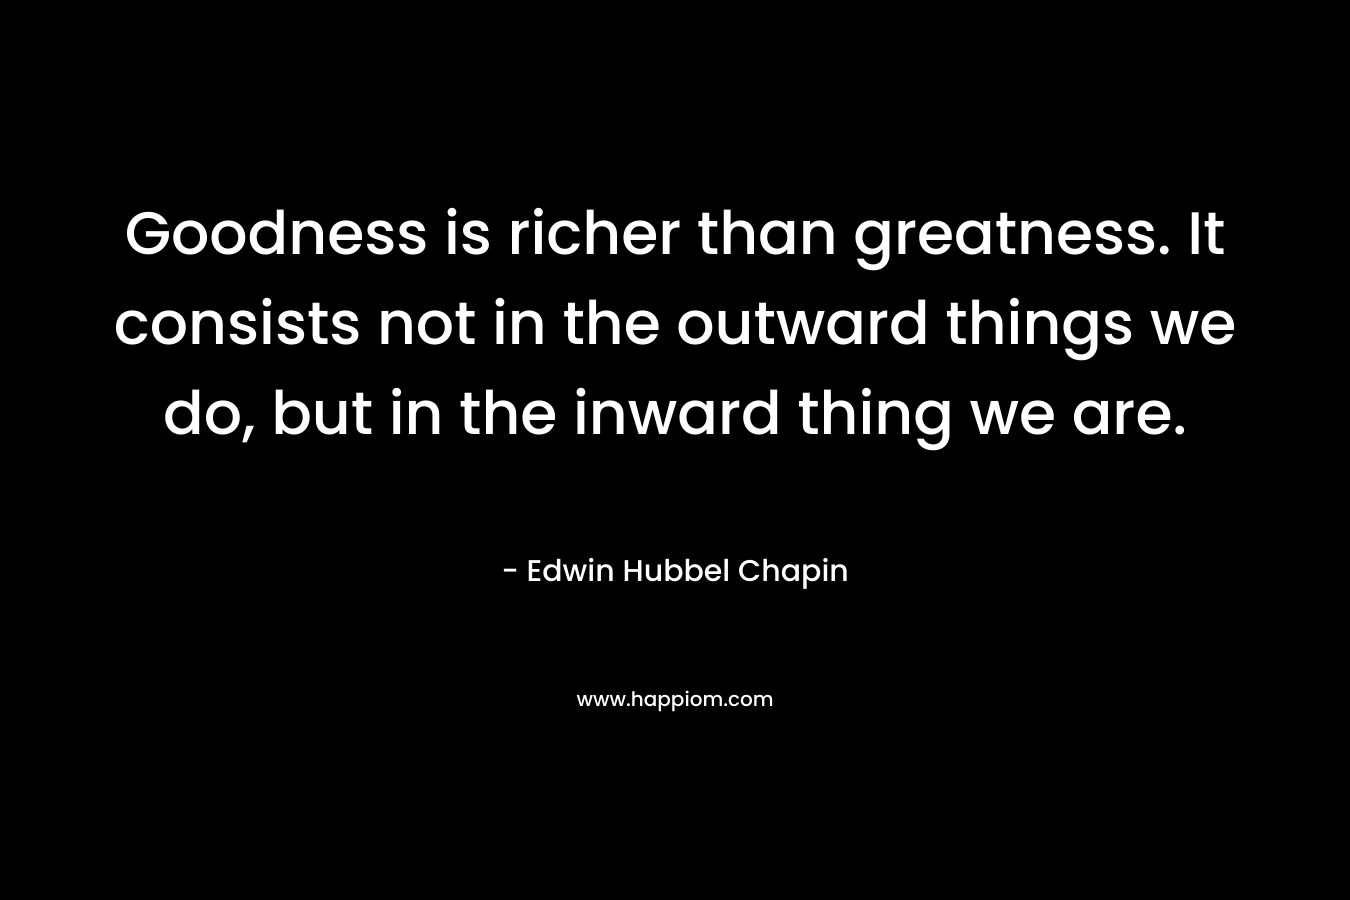 Goodness is richer than greatness. It consists not in the outward things we do, but in the inward thing we are. – Edwin Hubbel Chapin